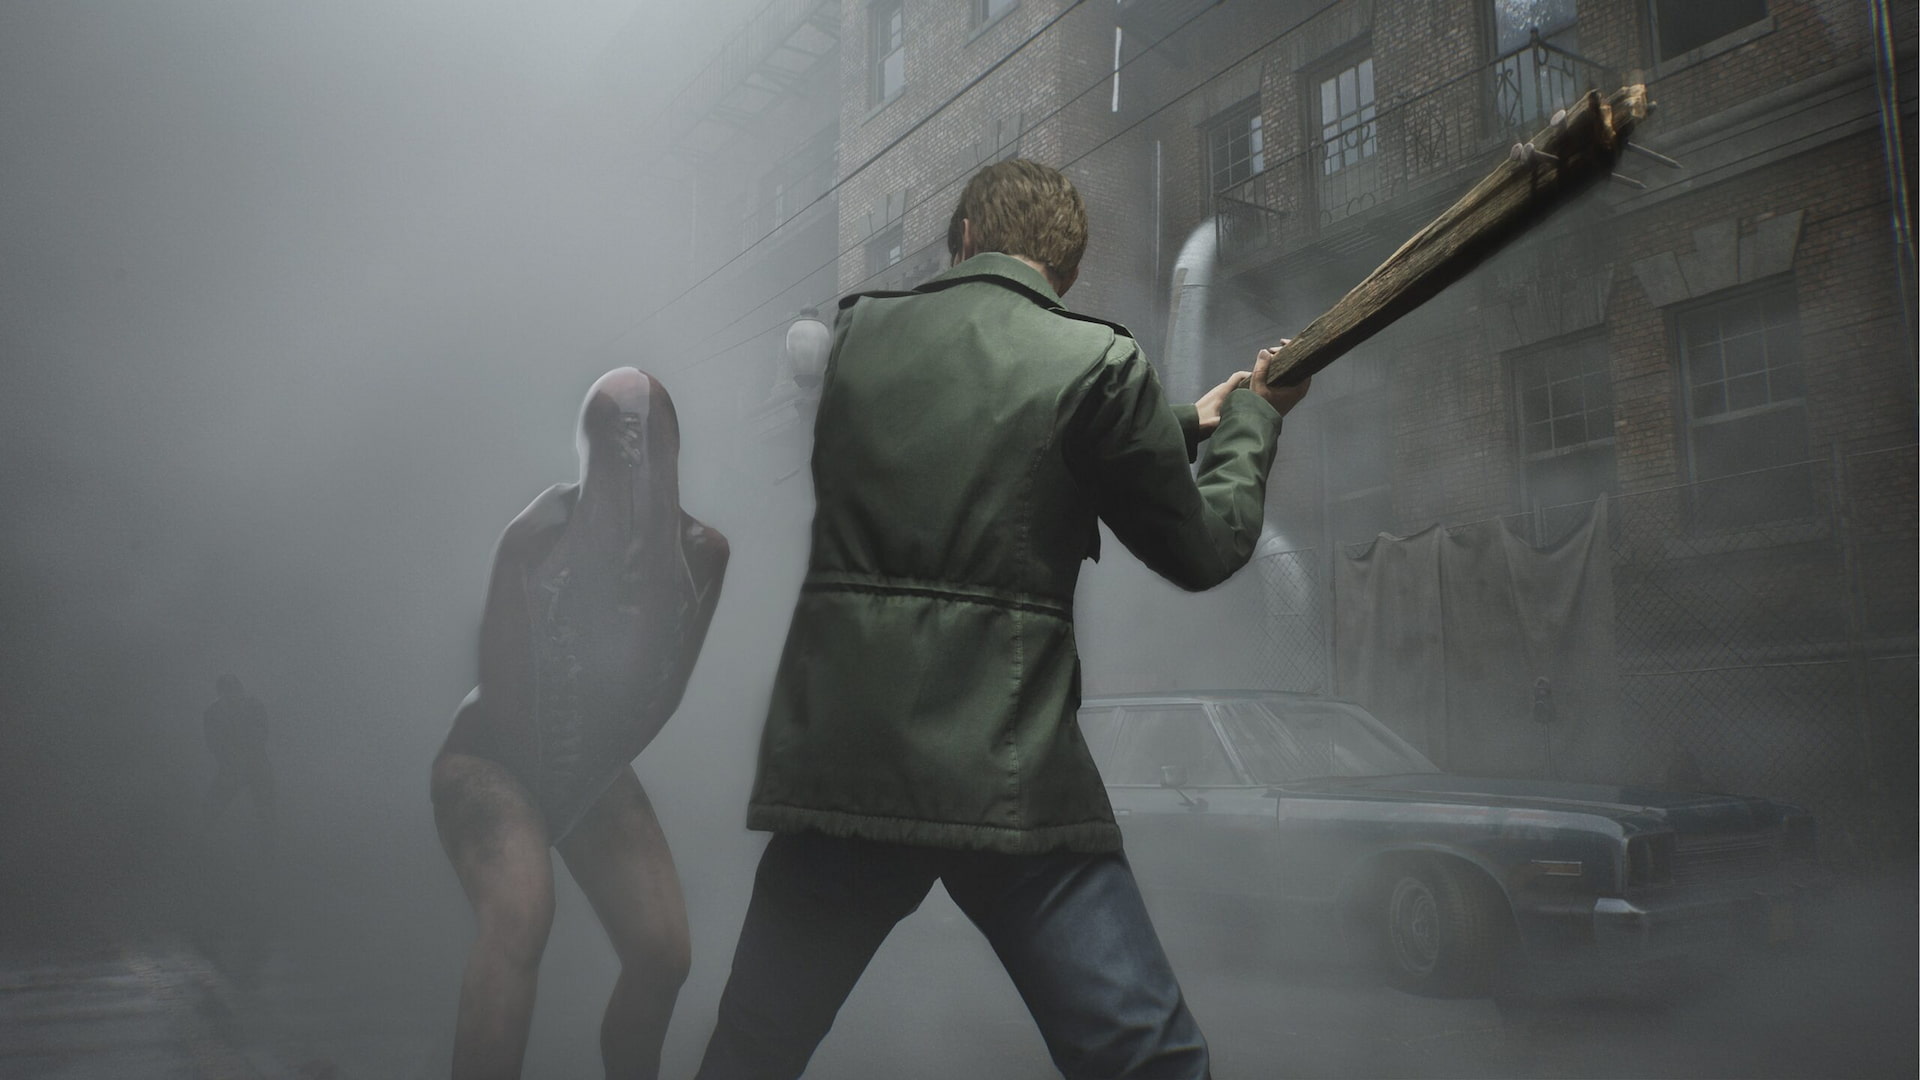 Silent Hill 2 finally coming to PC in its full glory with a Teaser Trailer  - News - Gamesplanet.com